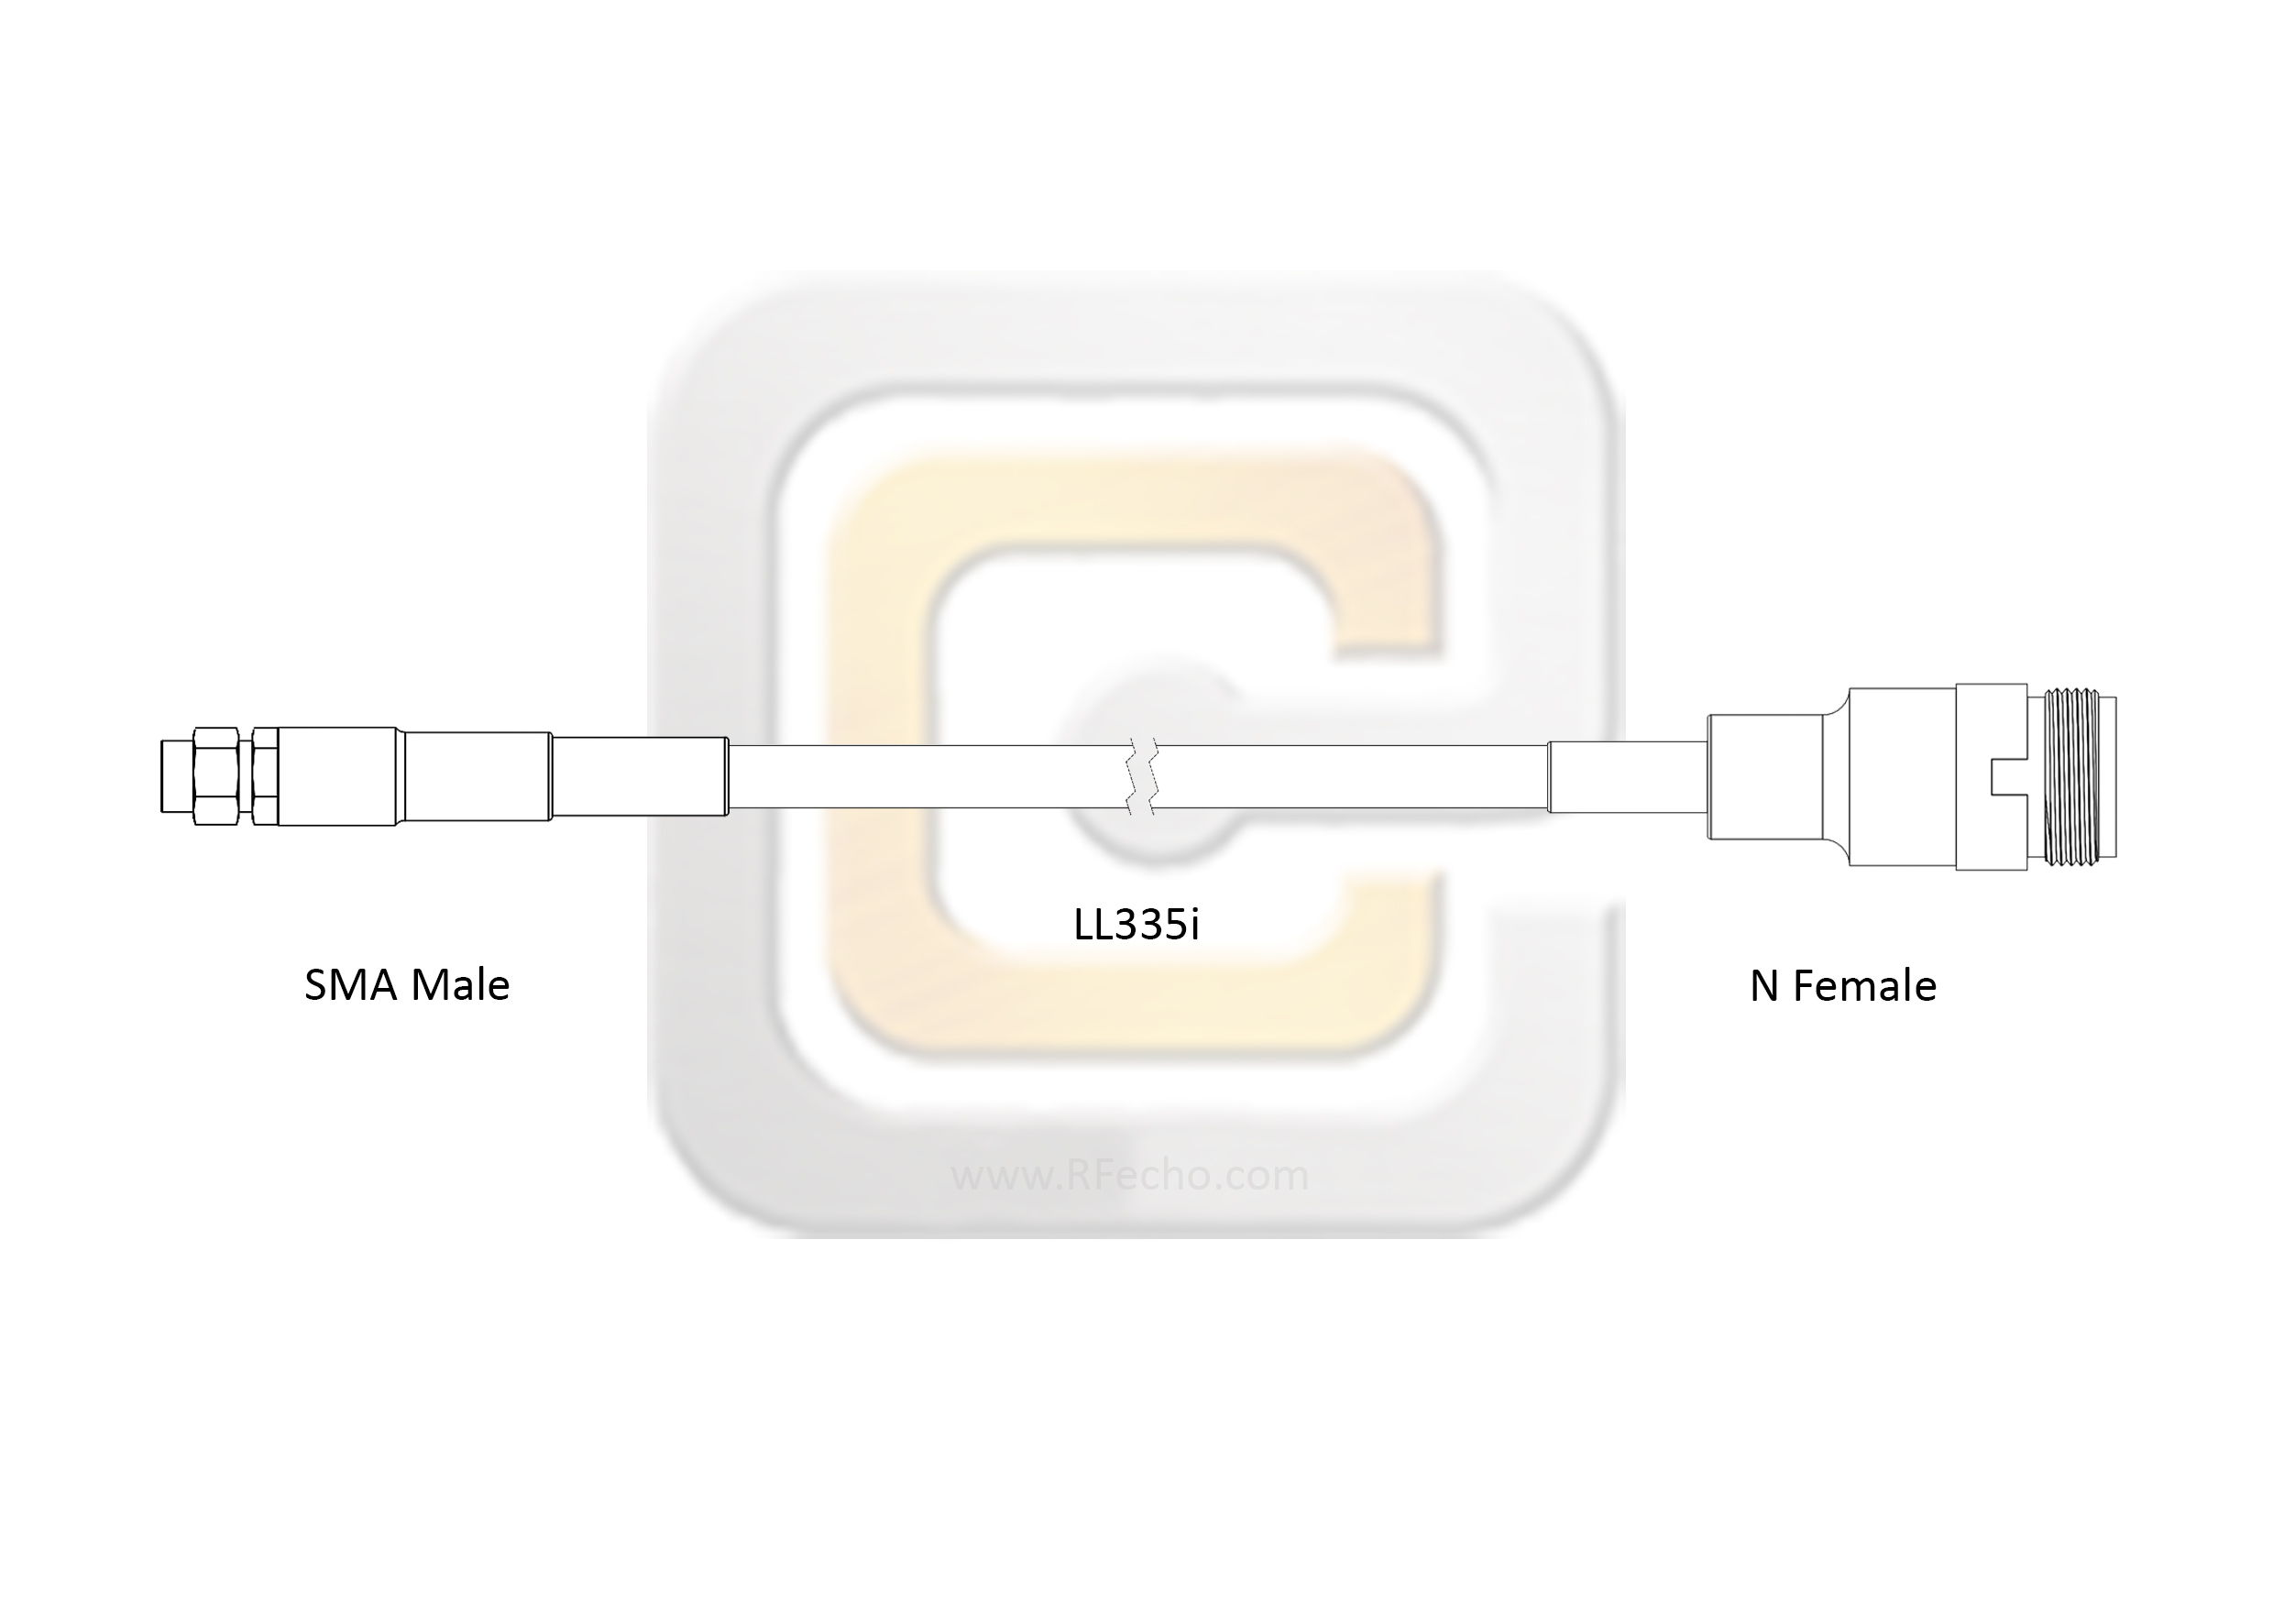 Low Loss SMA Male to N Female, 18 GHz,  LL335i Coax and RoHS